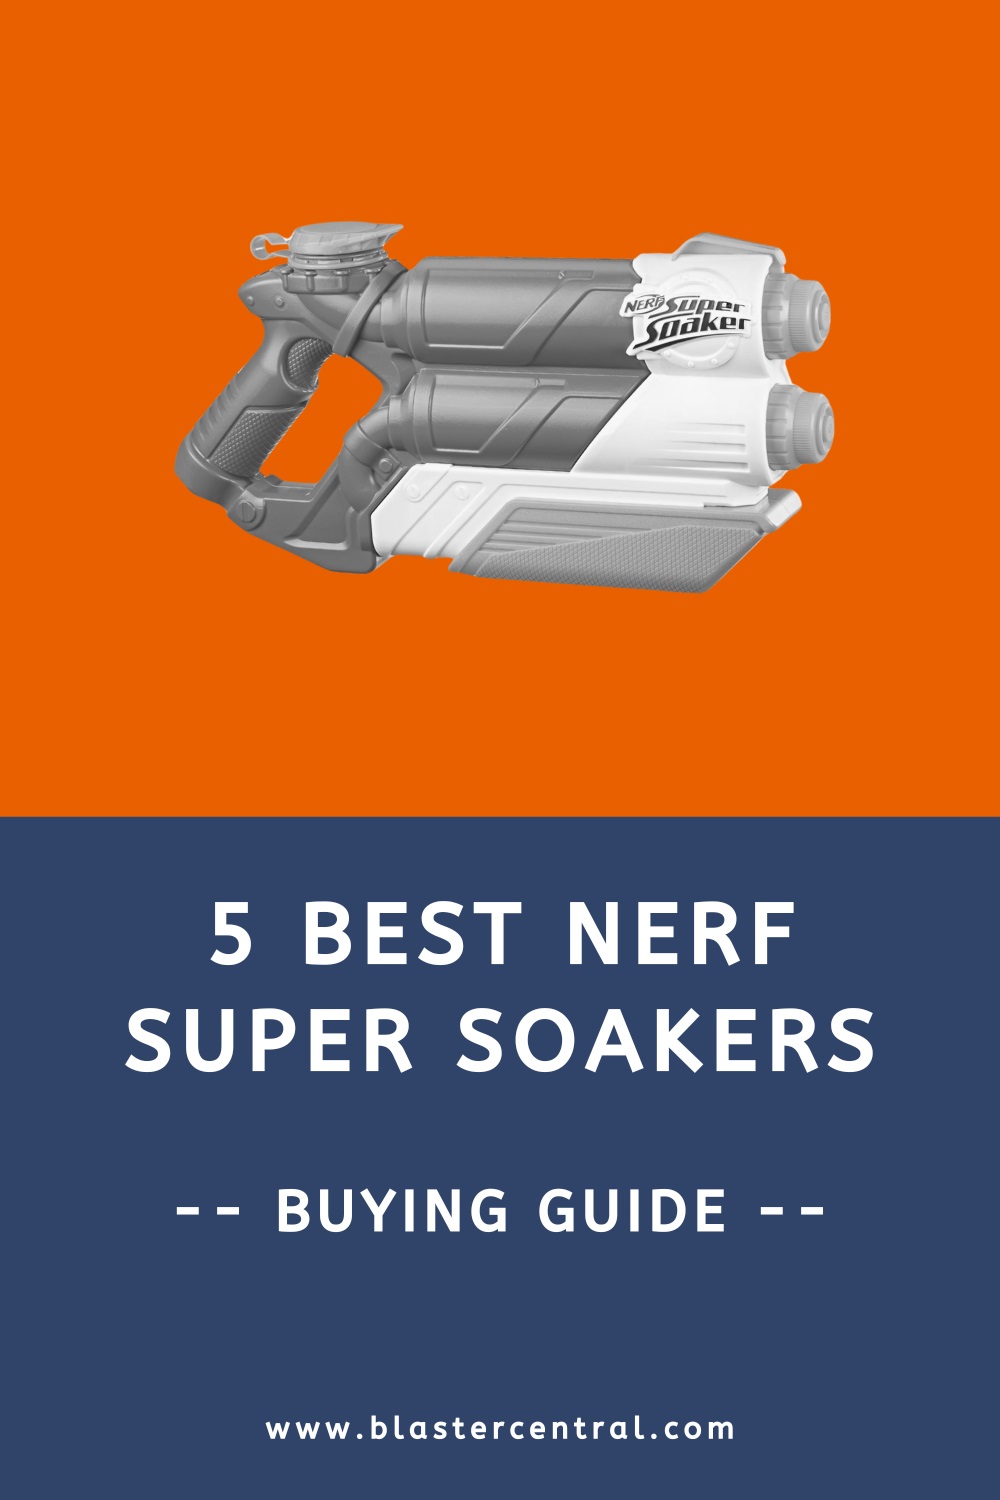 5 Best Nerf Super Soaker blasters (buying guide)